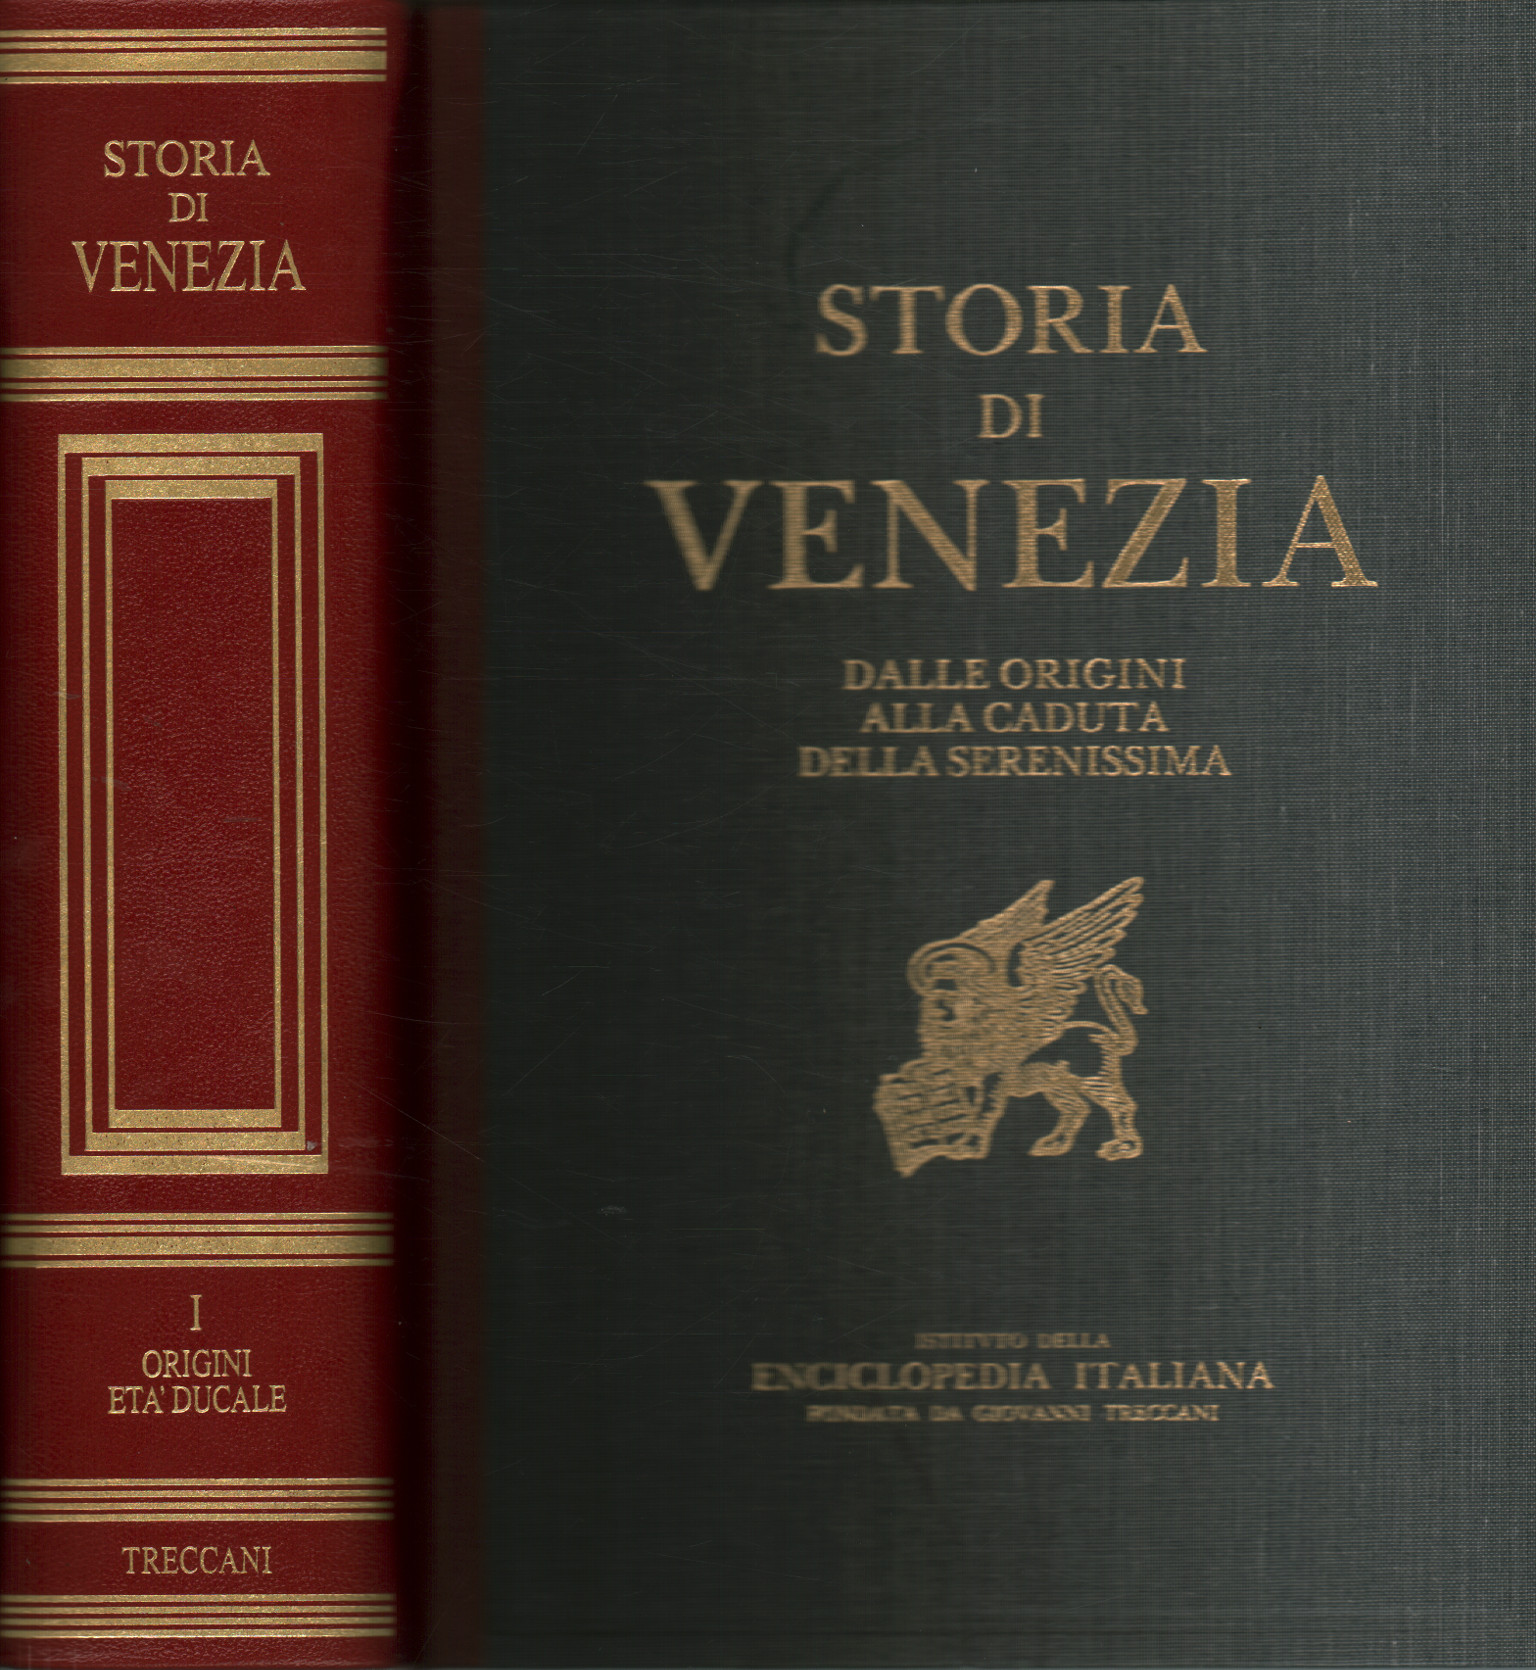 History of Venice from its origins to c